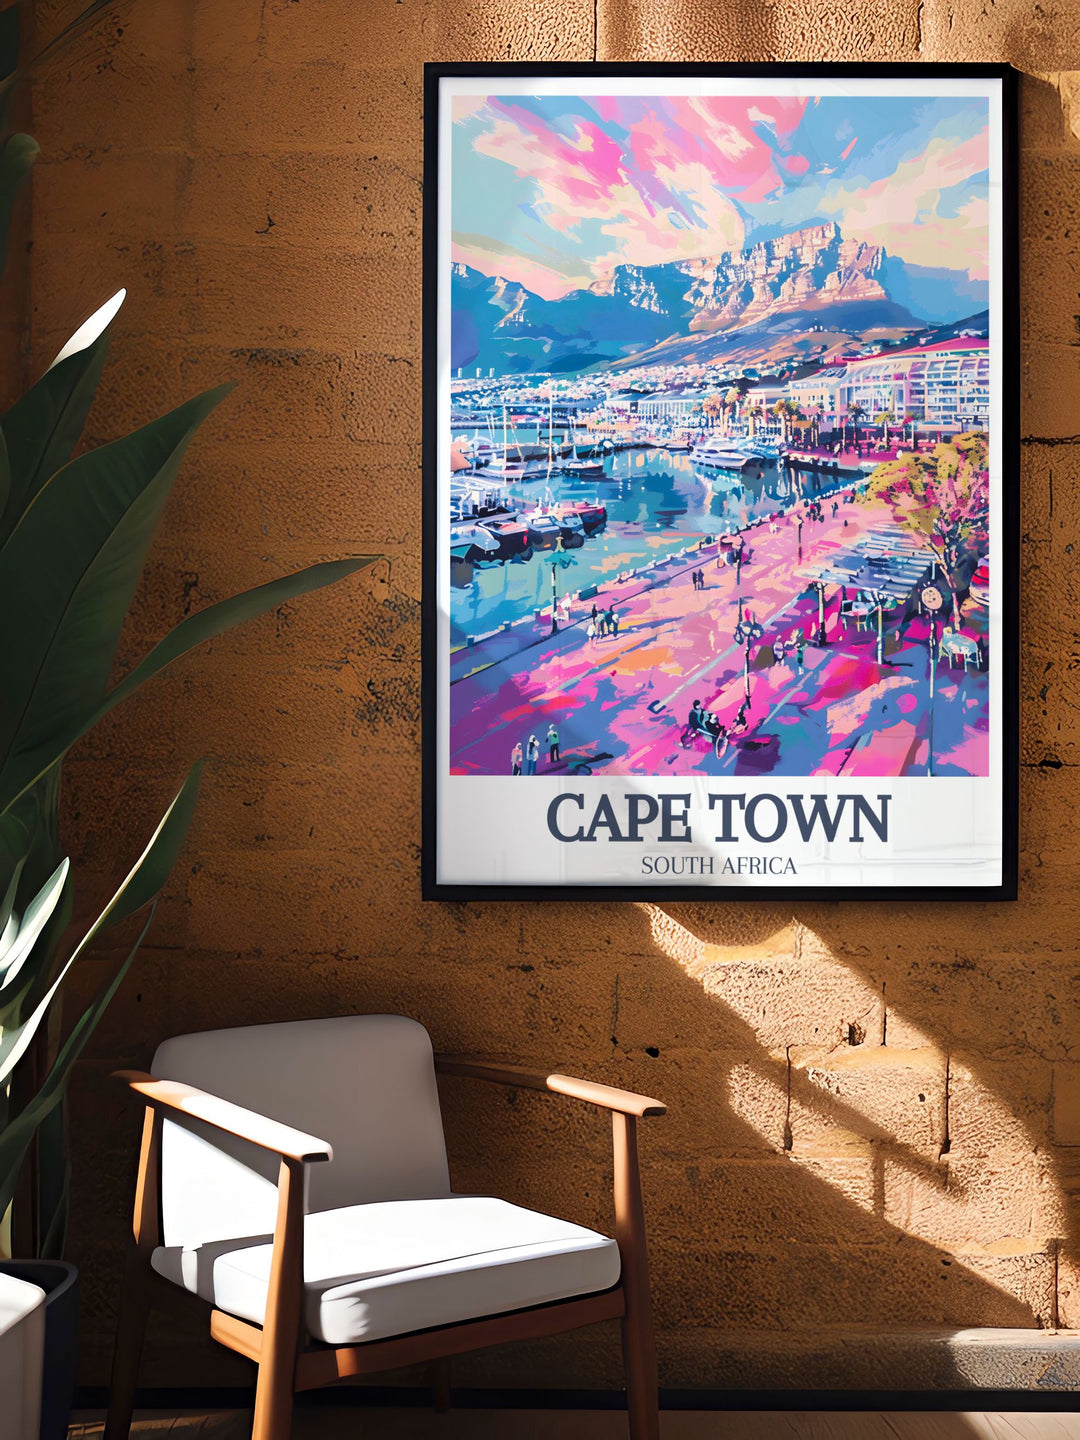 Stunning Cape Town art print featuring the iconic Table Mountain and Cape of Good Hope. Perfect for South Africa wall decor, this travel poster captures the essence of Cape Town and is a great addition to any home or office.